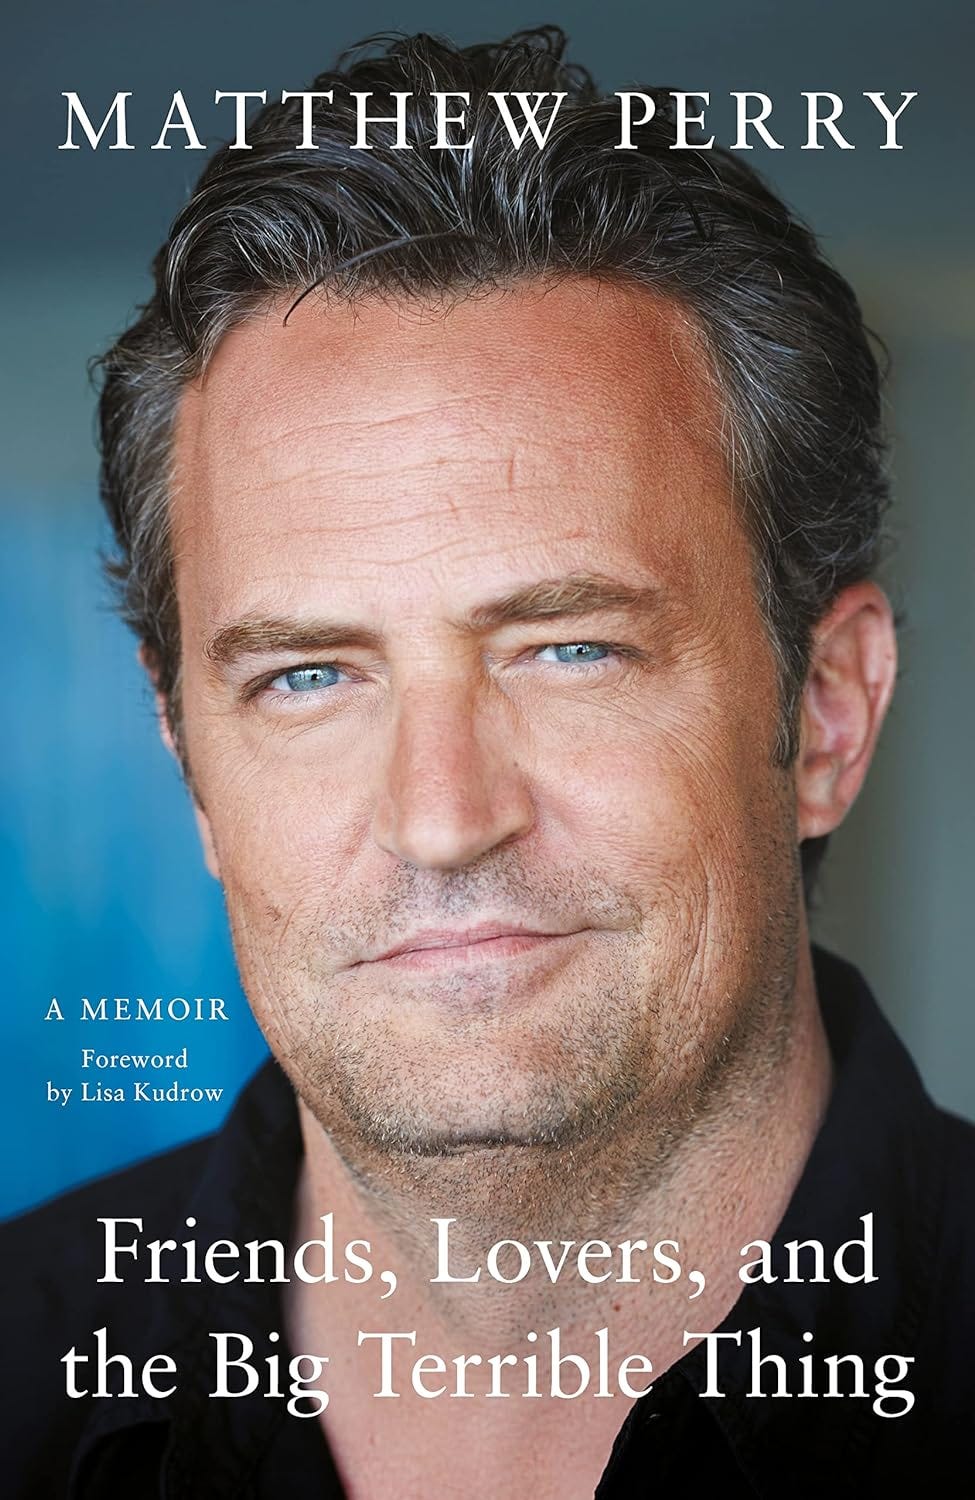 Friends' Matthew Perry reveals tell-all autobiography finally